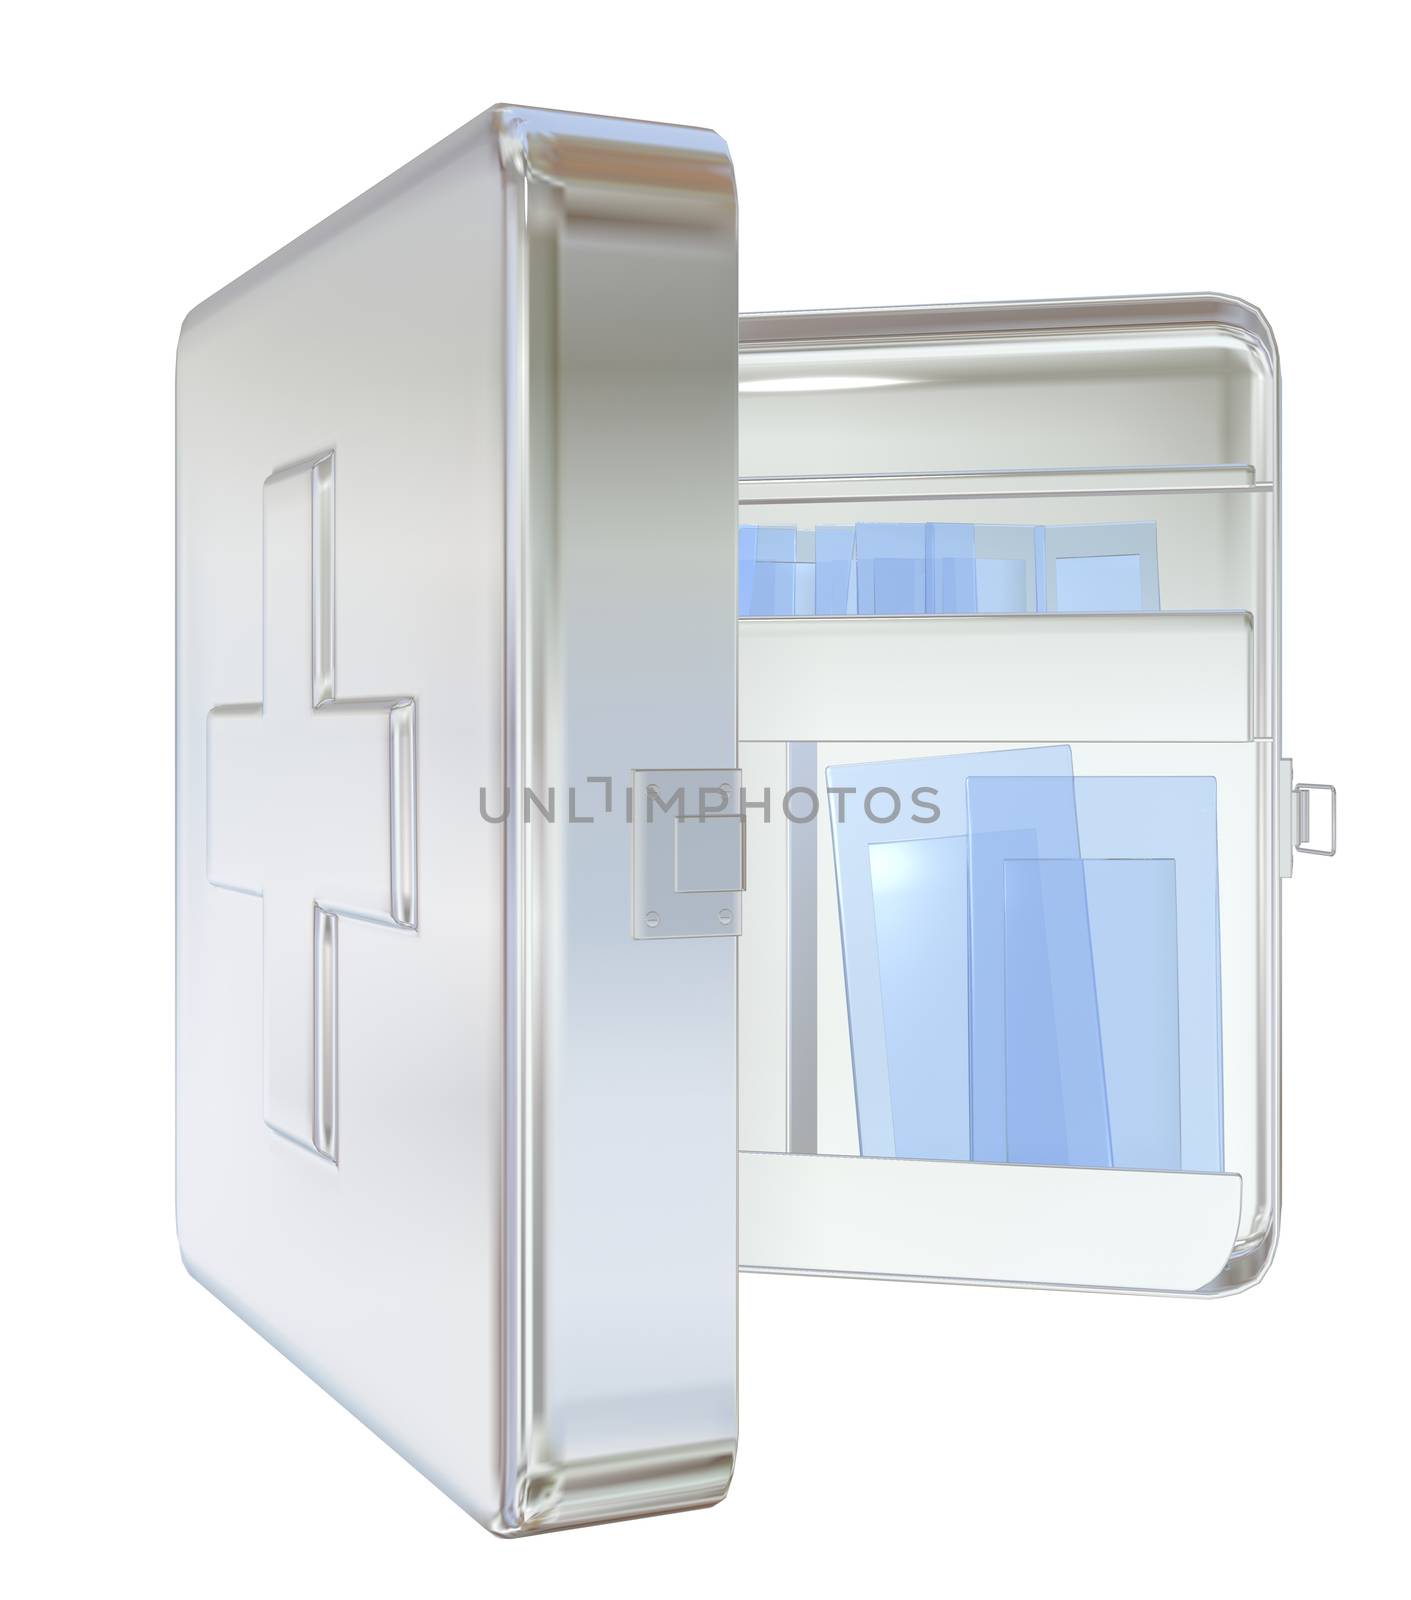 Medicine cabinet, white, wall-mounted, opened,  3D illustration, isolated against a white background.